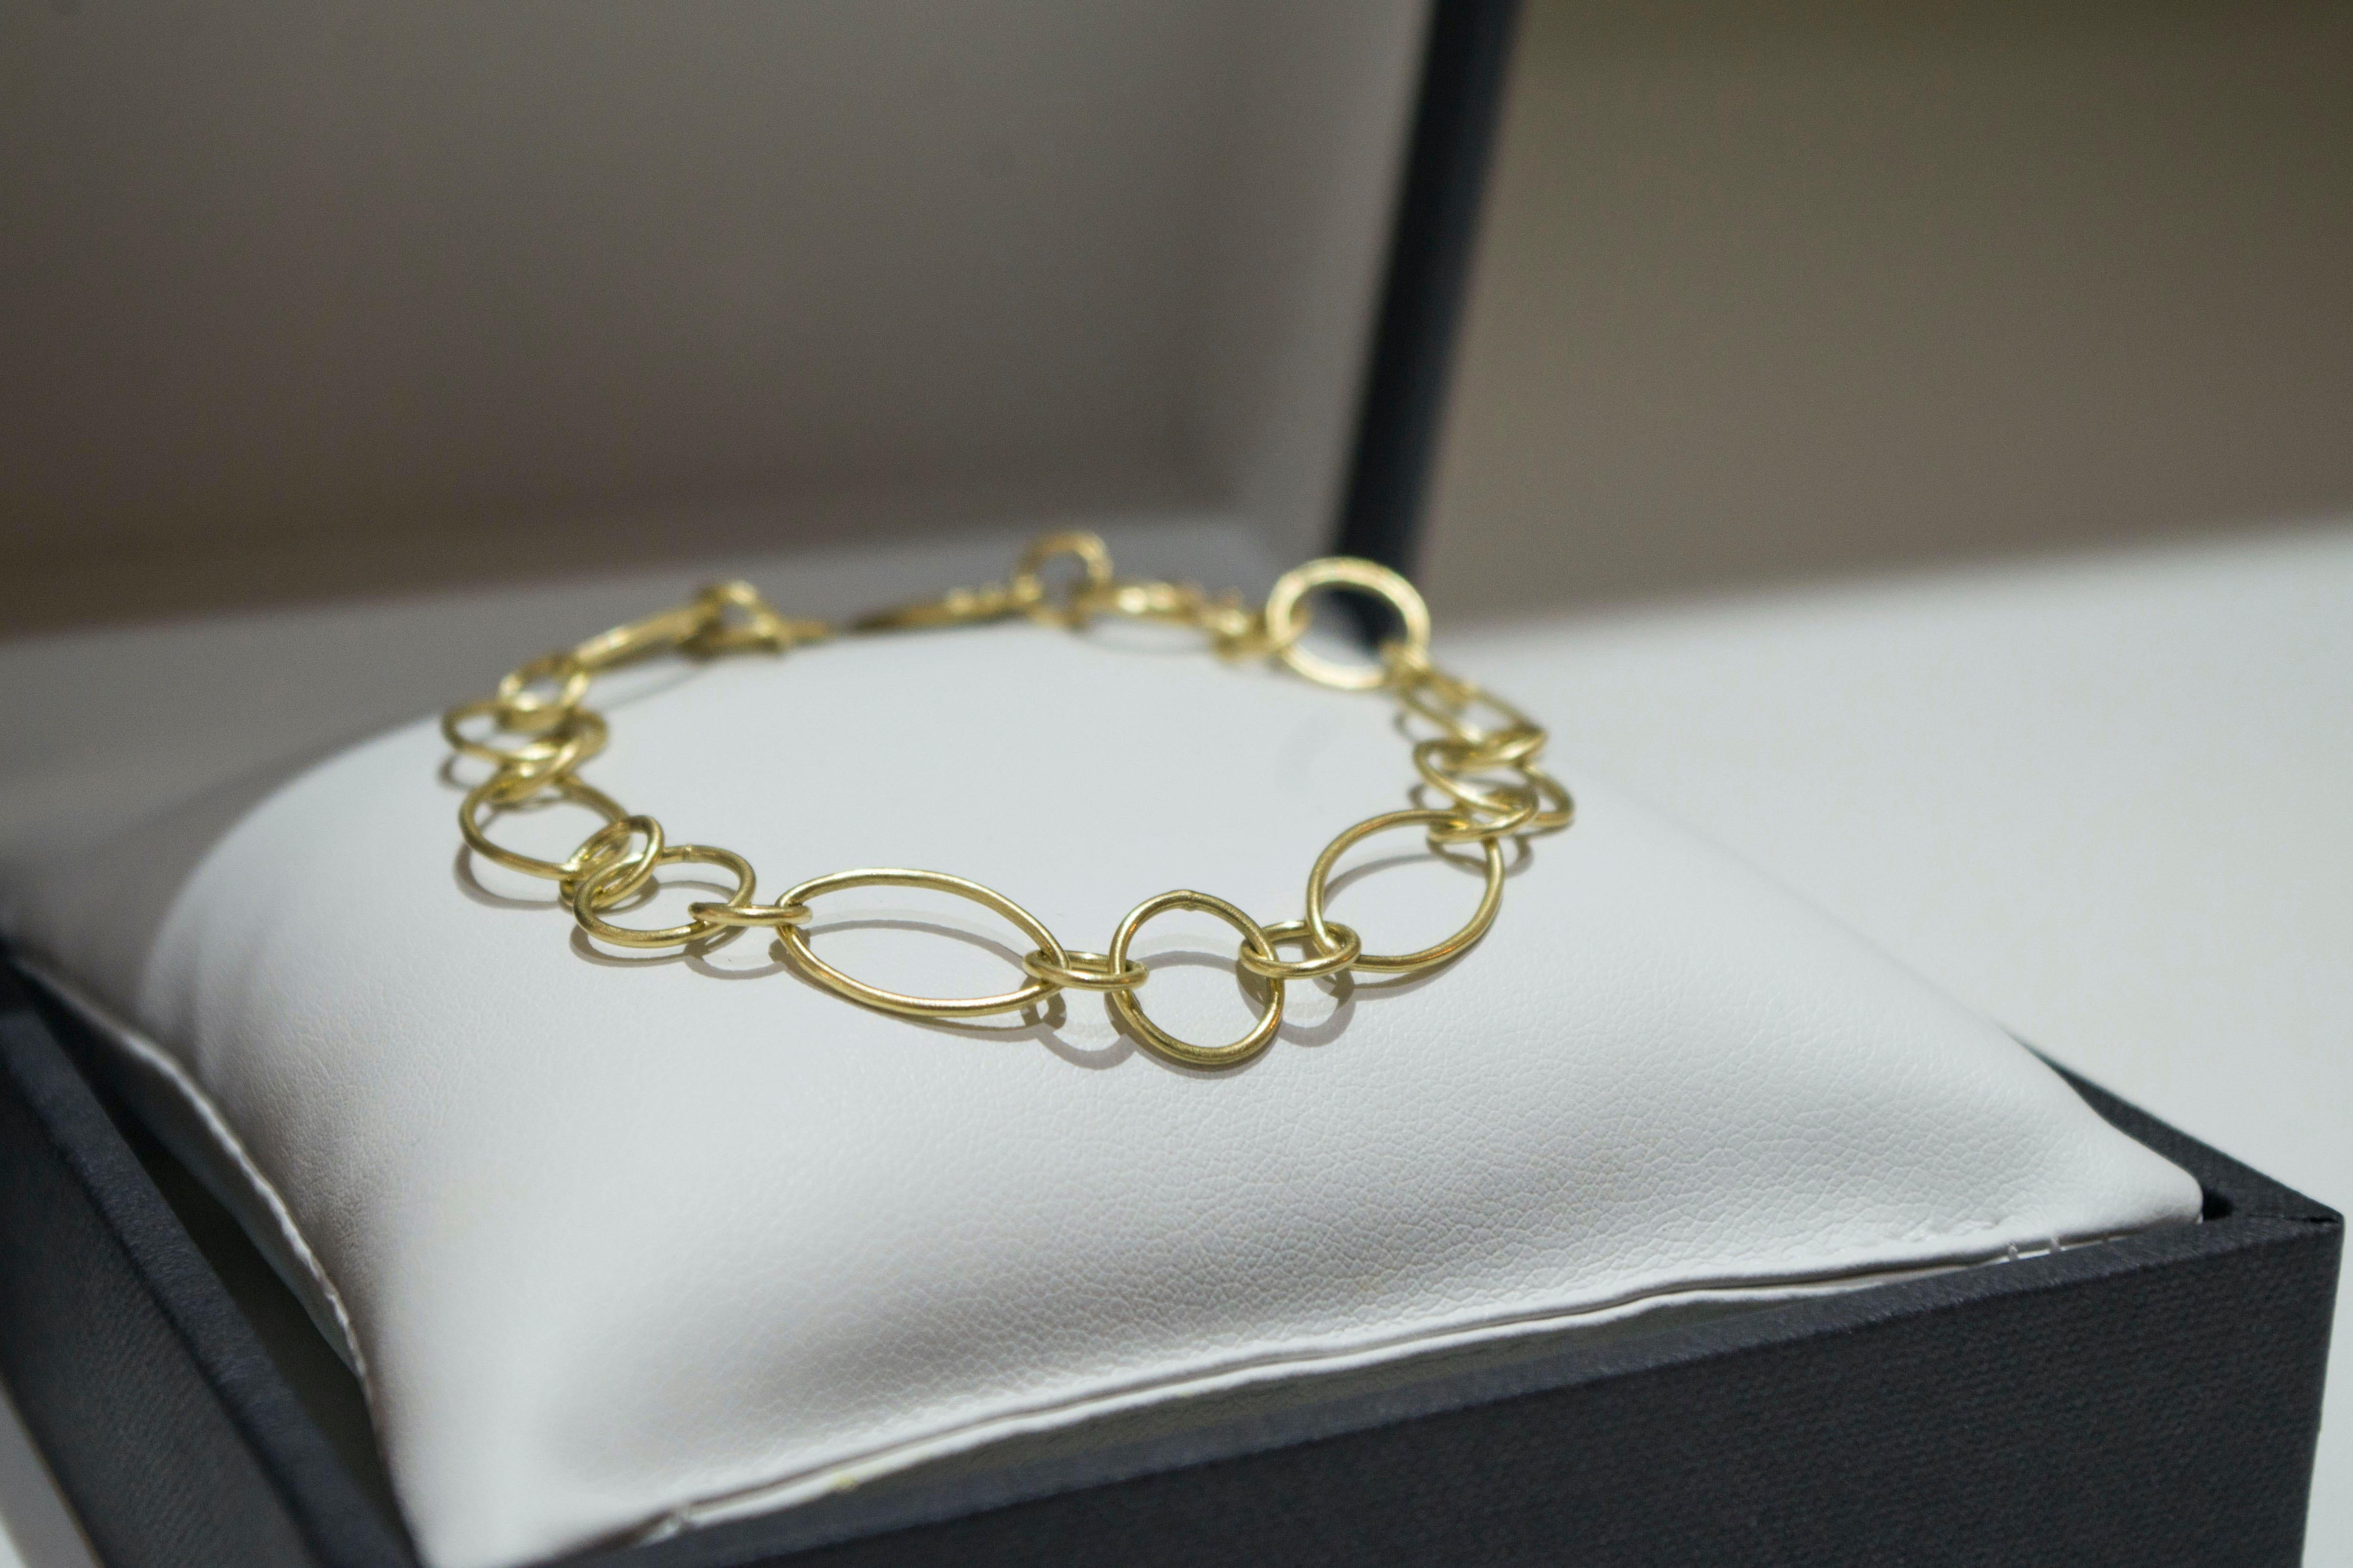 18k Gold open link bracelet handcrafted with mixed shapes and sizes.
Matt finished, with a safety hook. Personalize it with your own charms or choose from our selection.

Width: 10MM
Length: 7